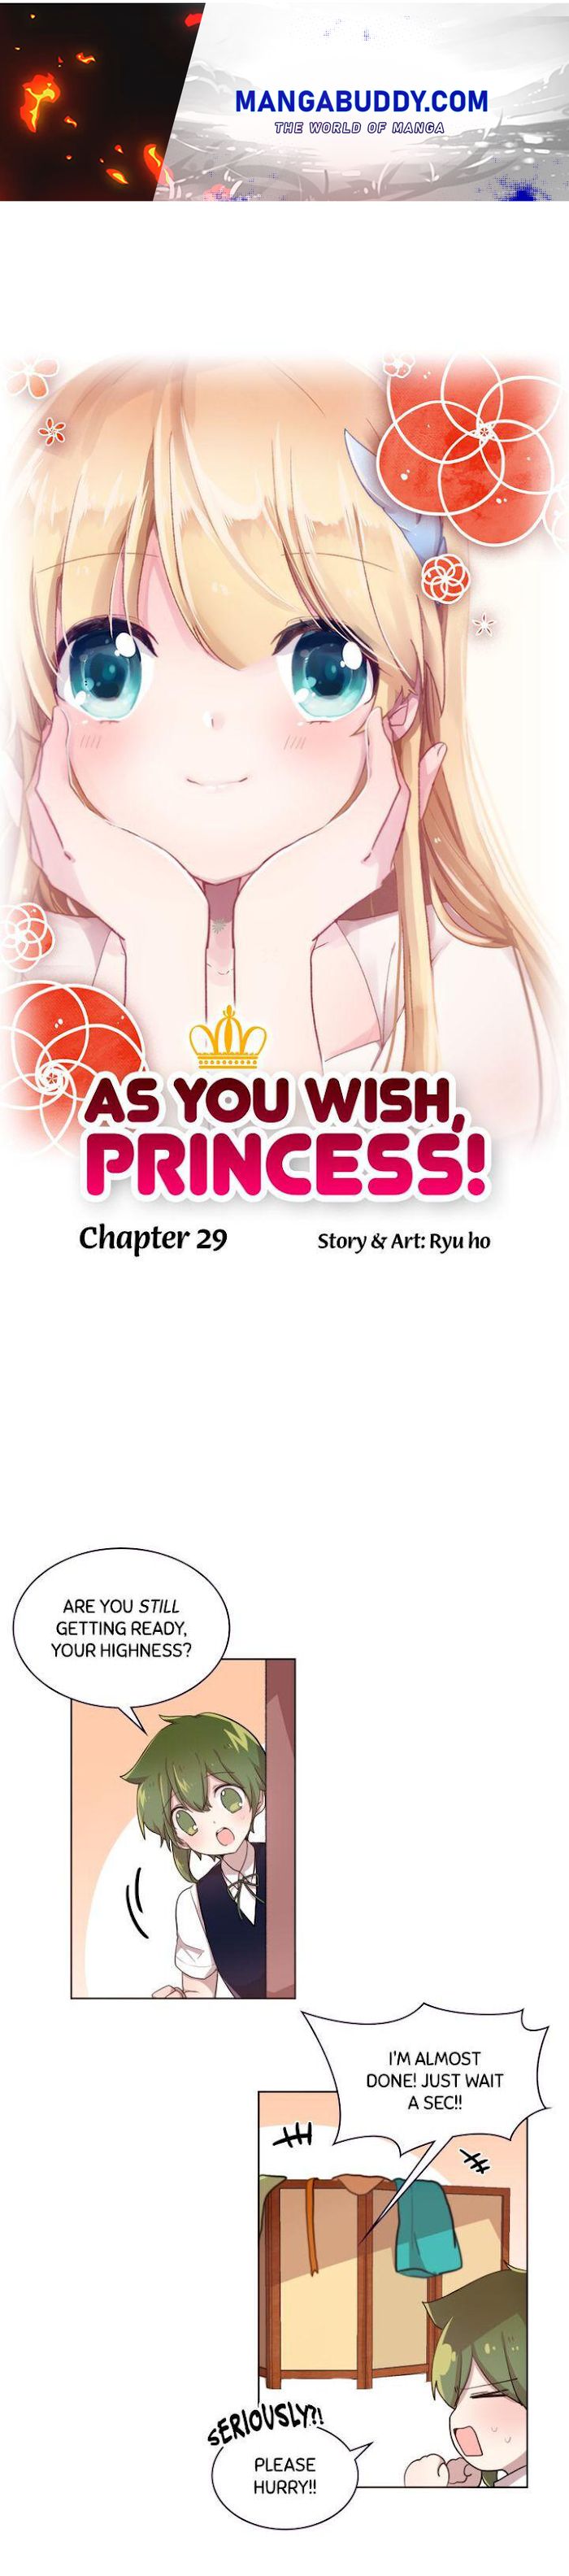 Whatever The Princess Desires! - Page 1